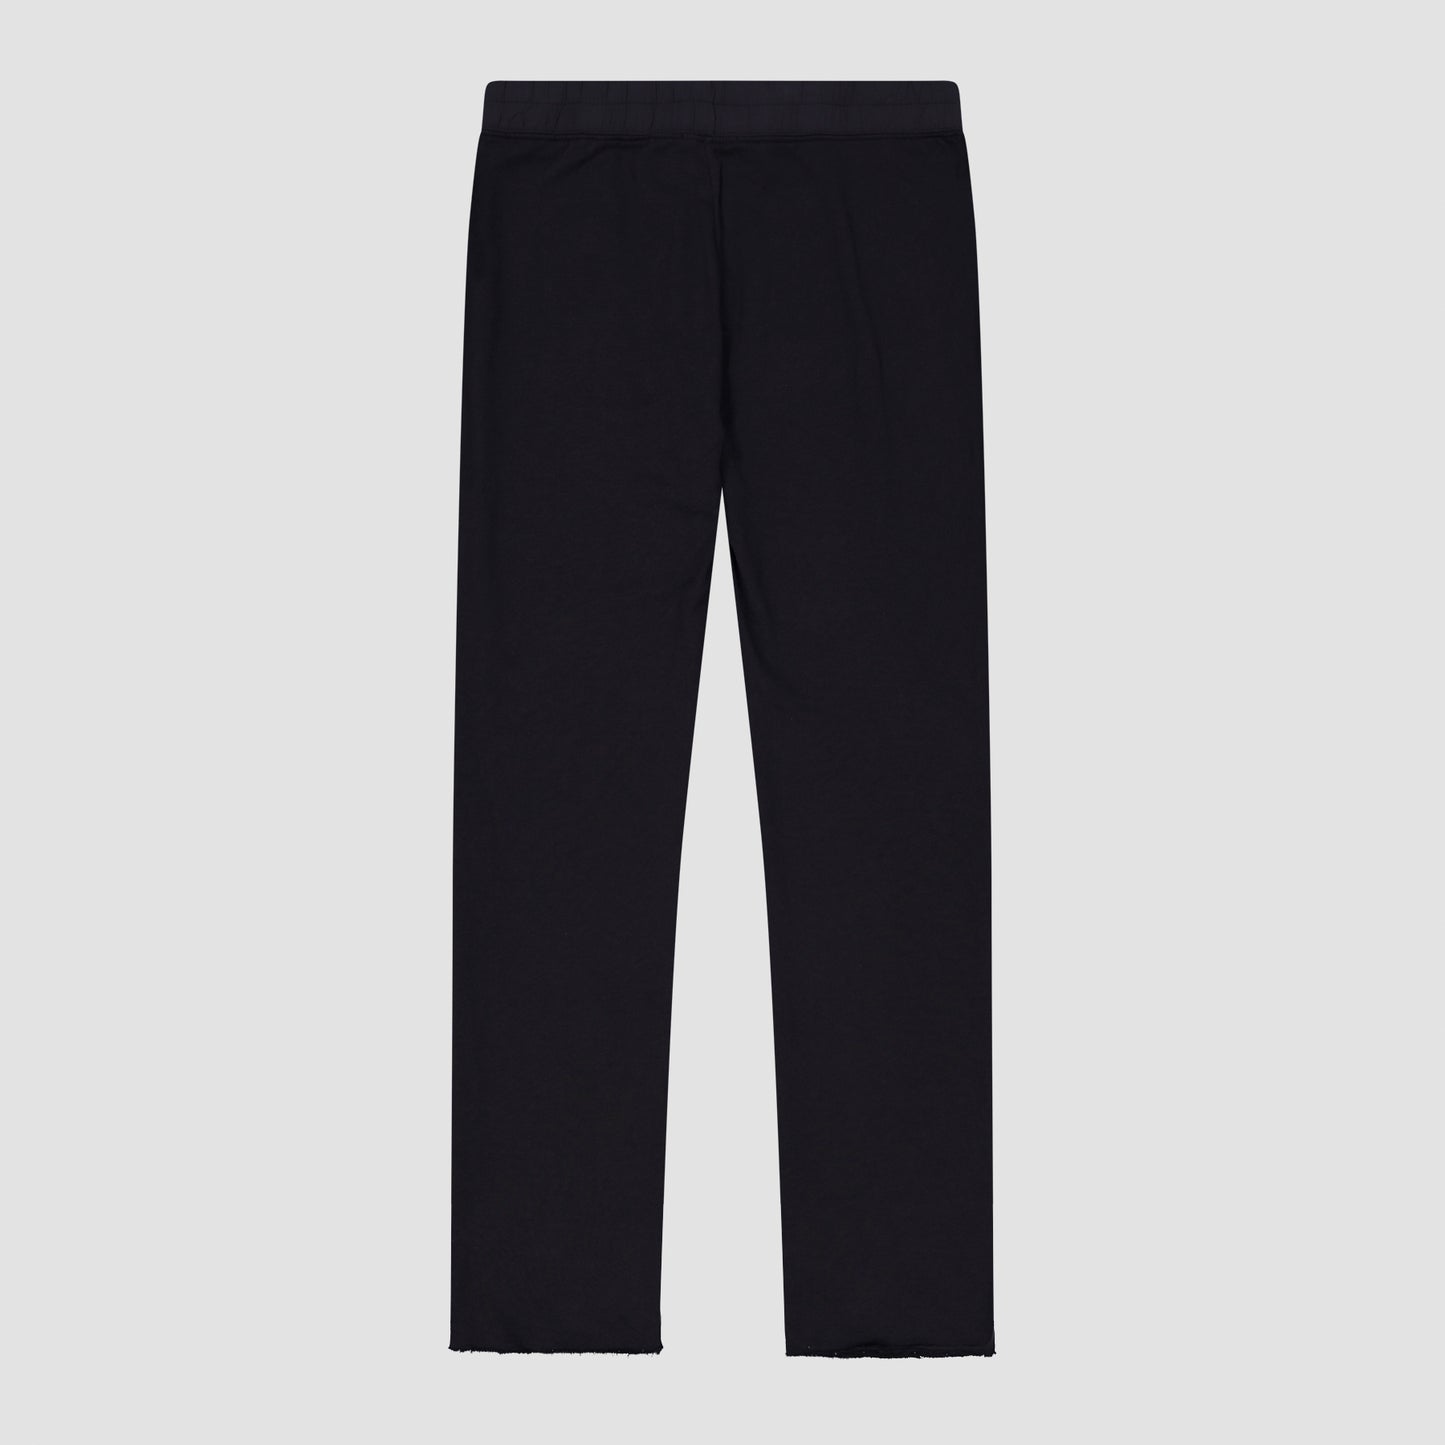 French Terry Sweatpant - Black